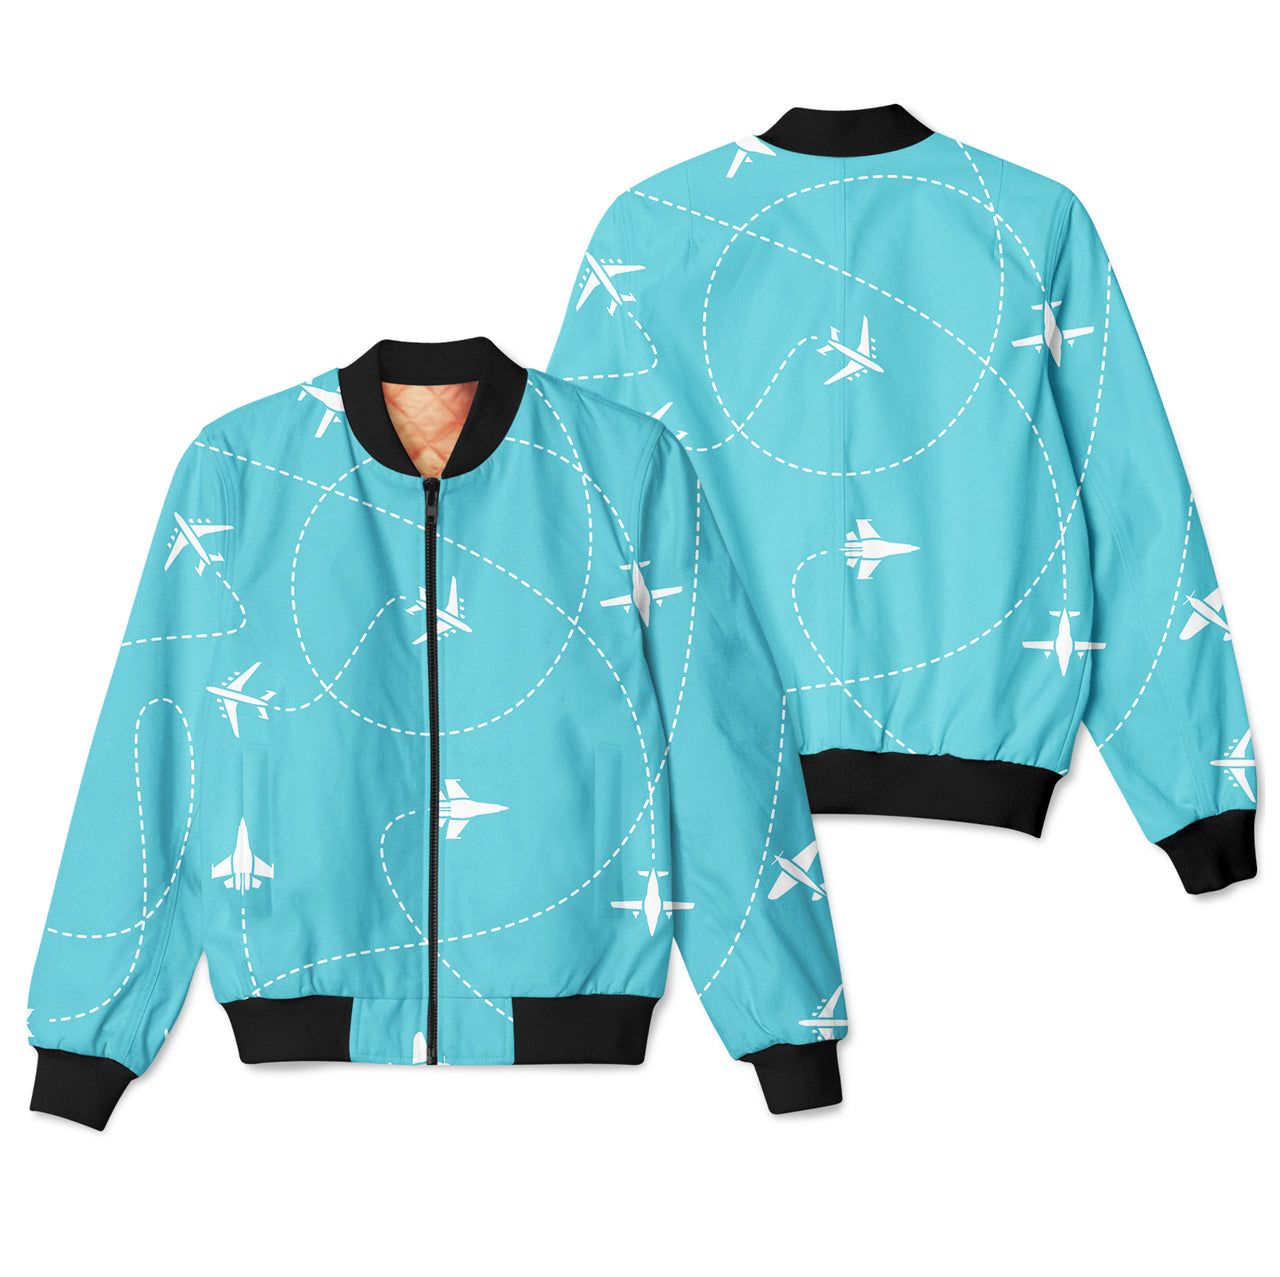 Travel The The World By Plane Designed 3D Pilot Bomber Jackets